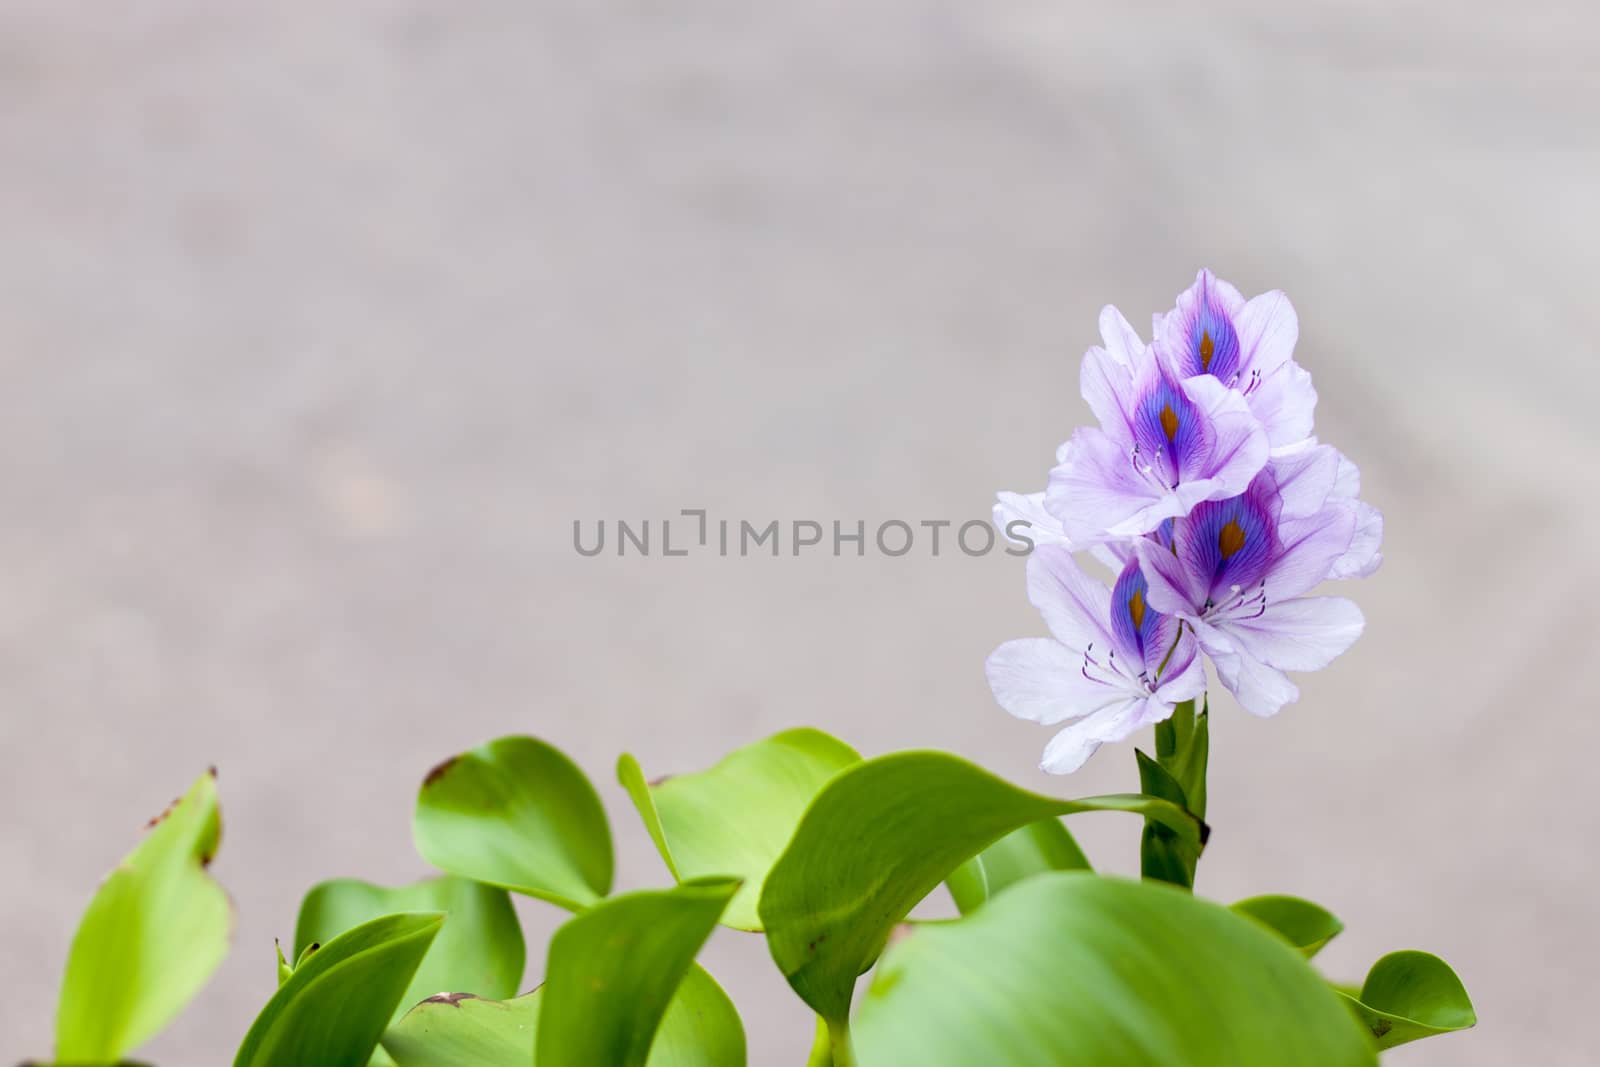 Beautiful Water Hyacinth flowers on the background blurred
